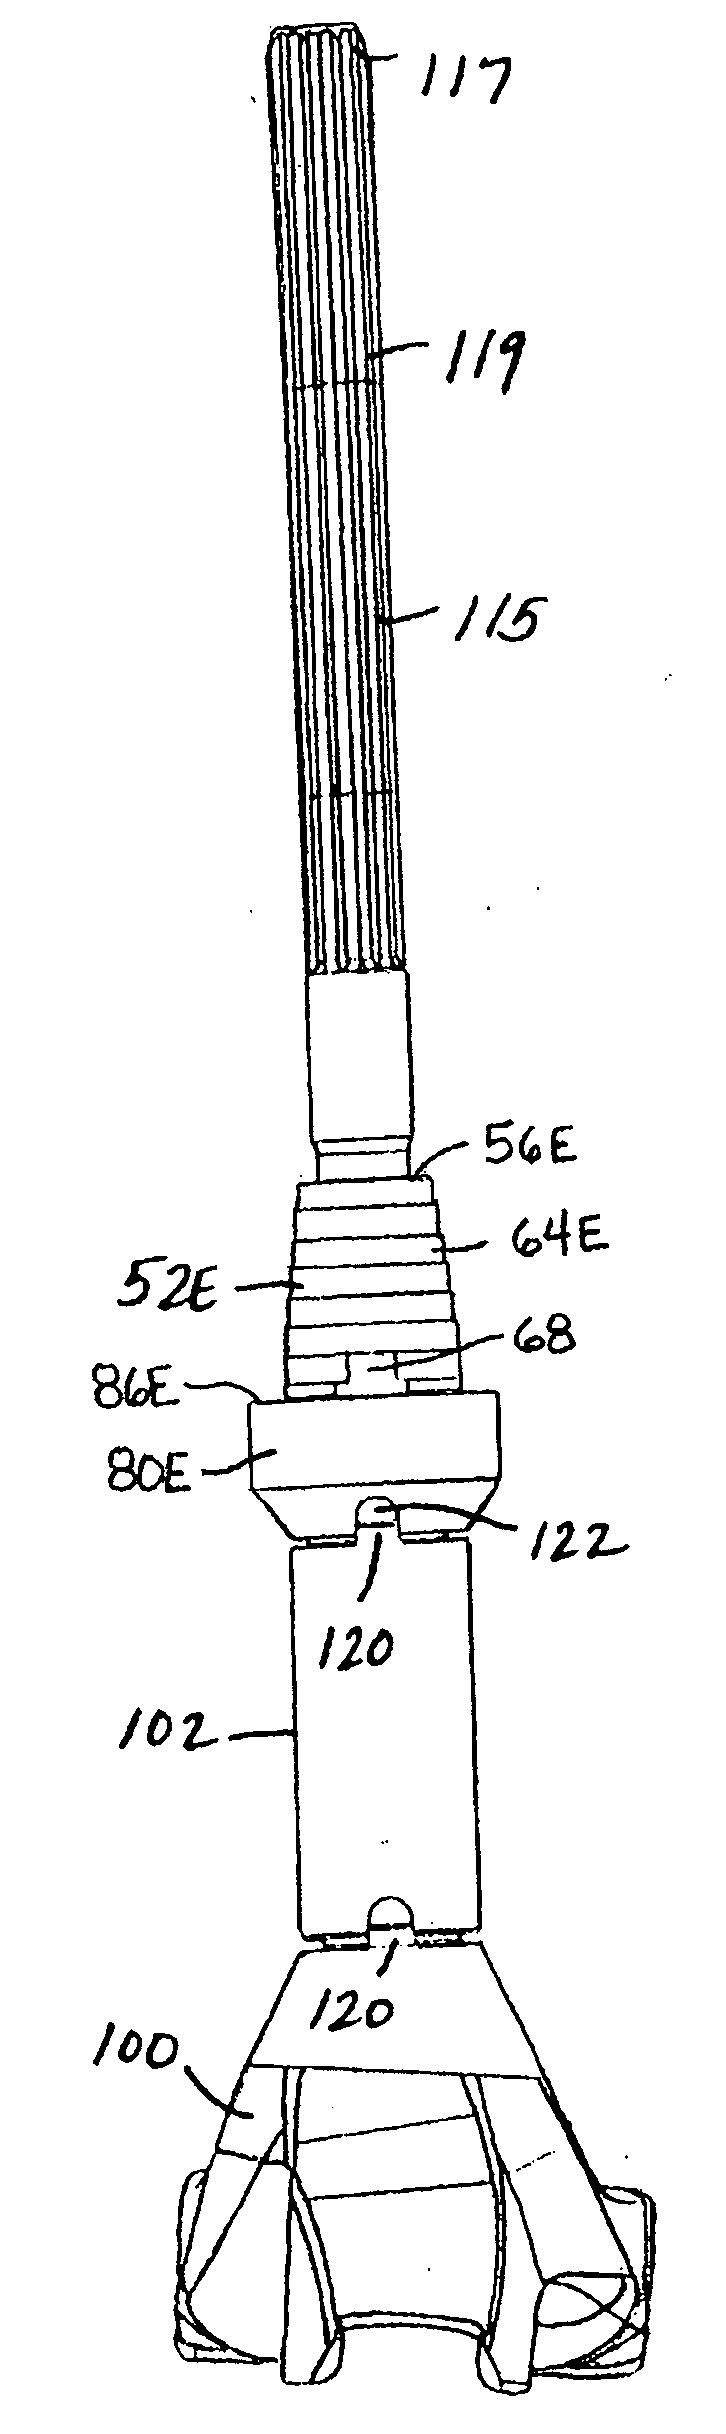 Modular implant system and method with diaphyseal implant